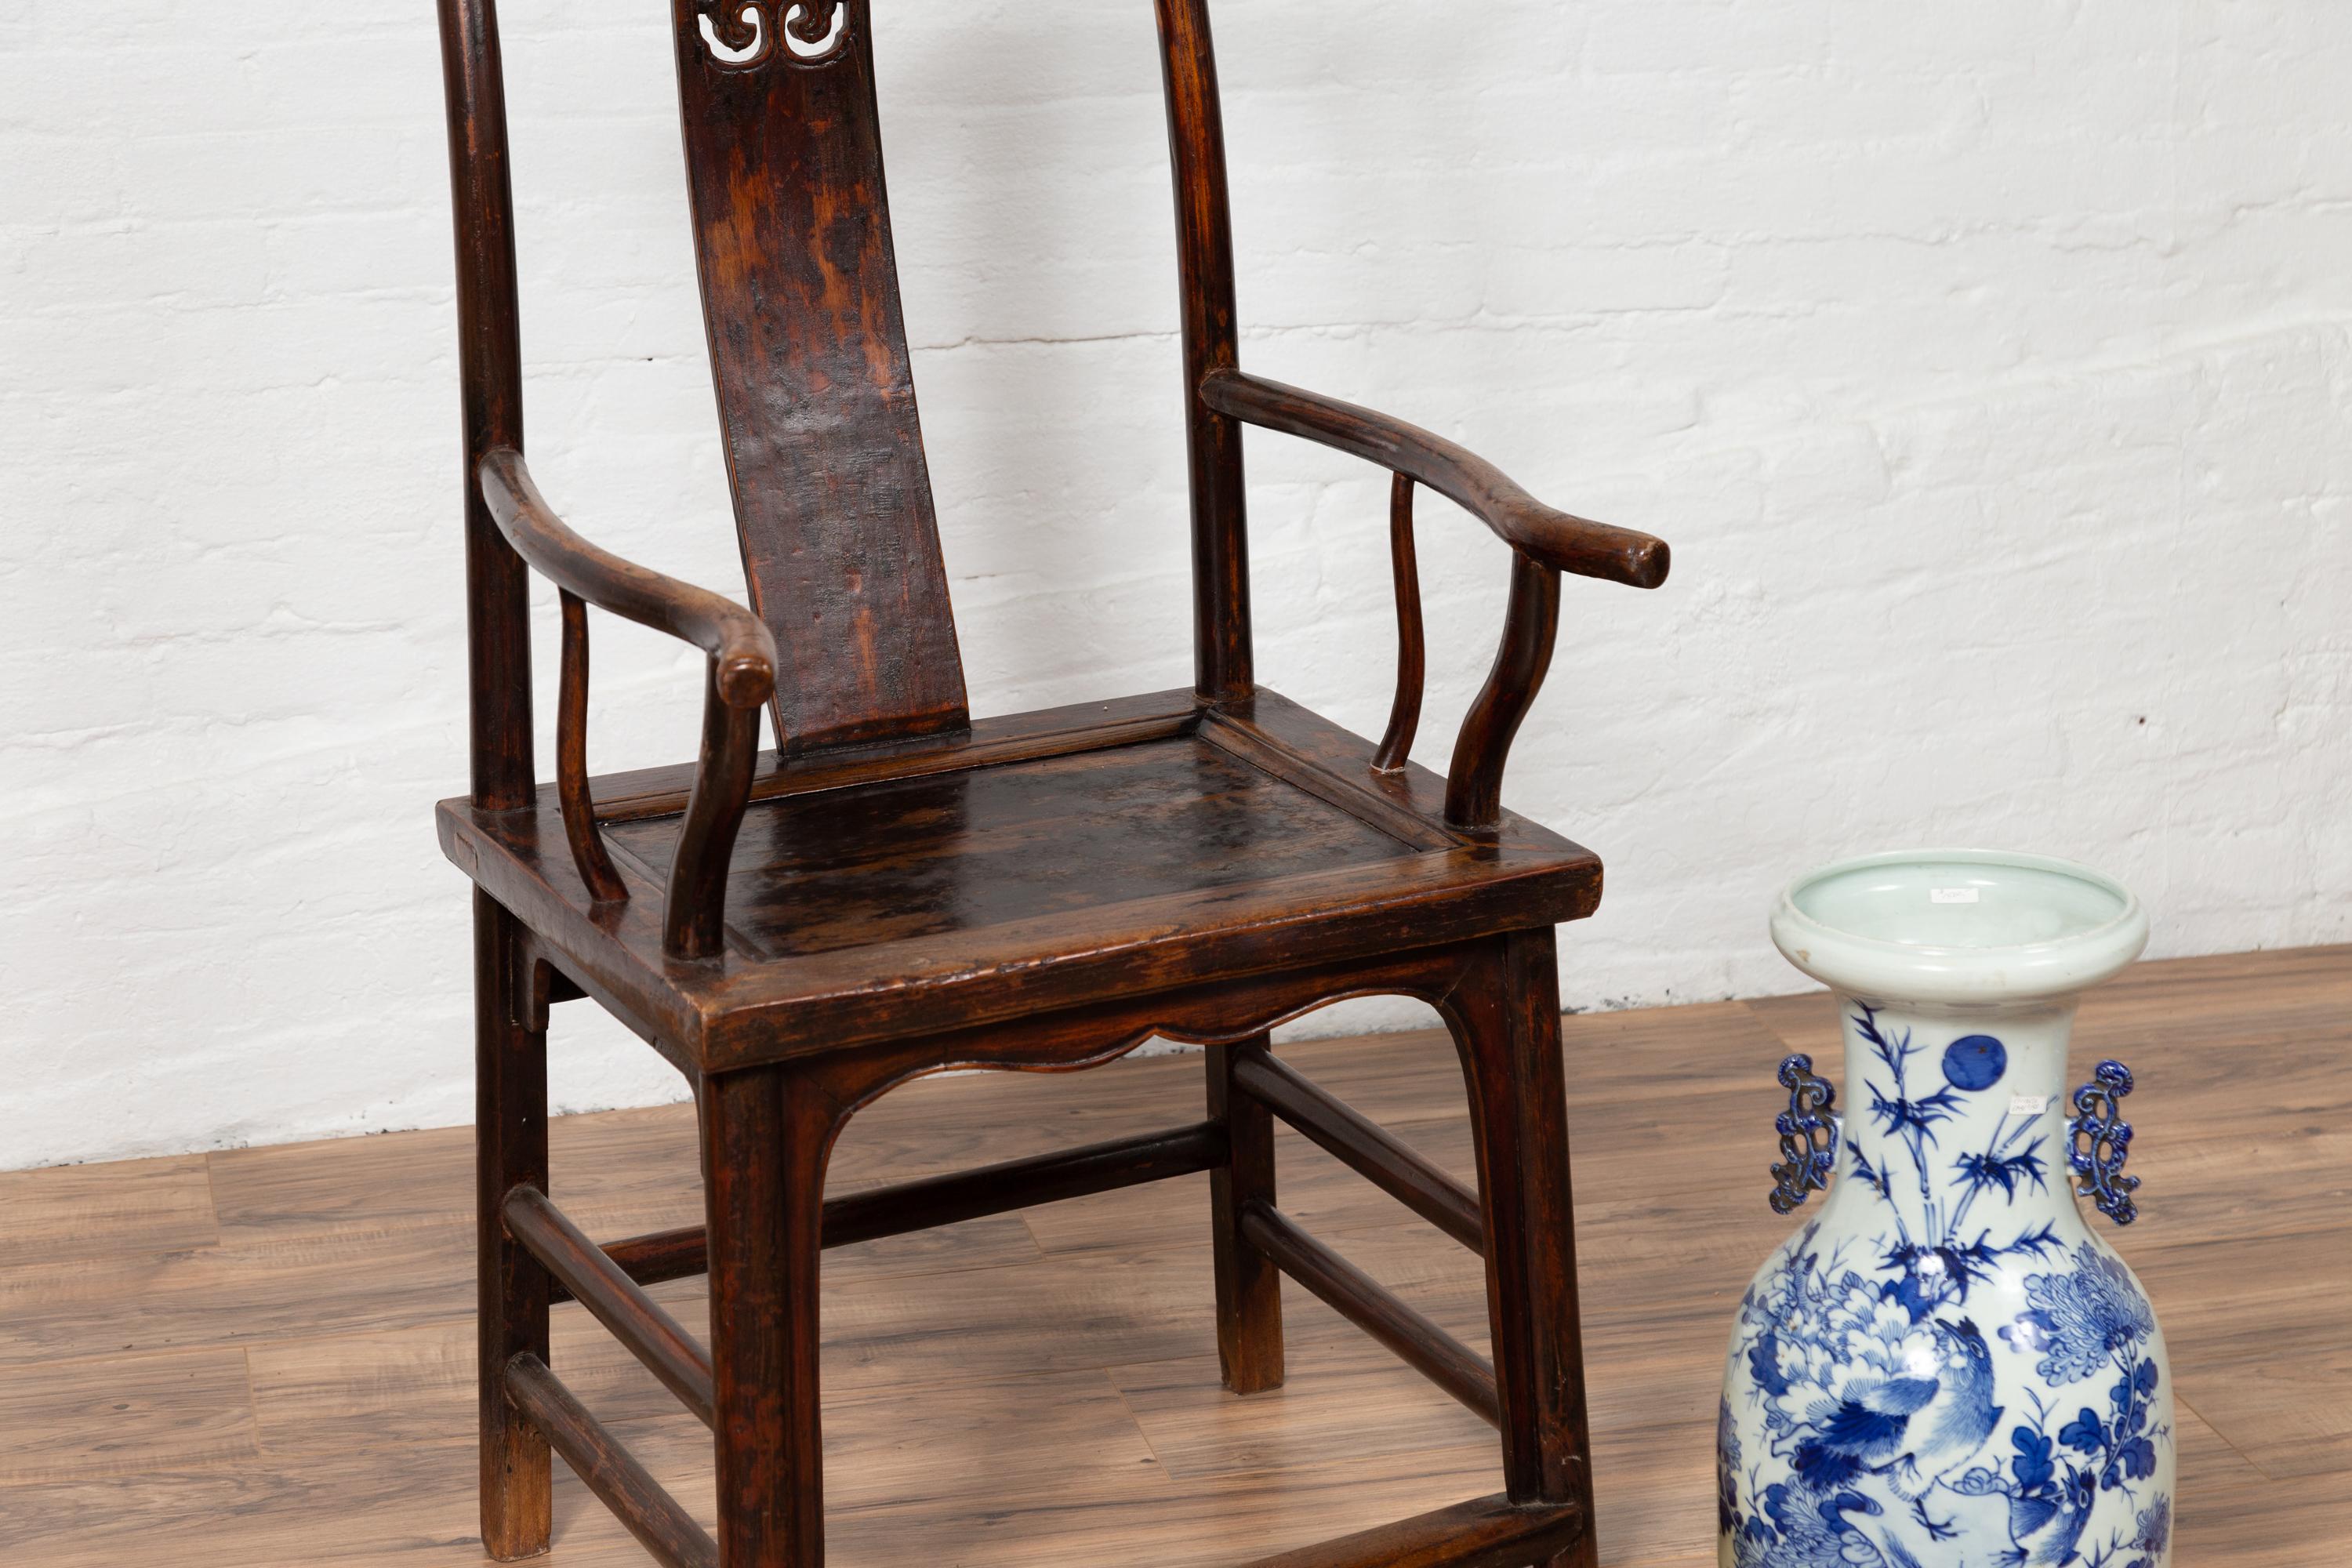 Pair of Chinese 1880s Official's Hat Chairs with Pierced Splats and Curving Arms For Sale 6